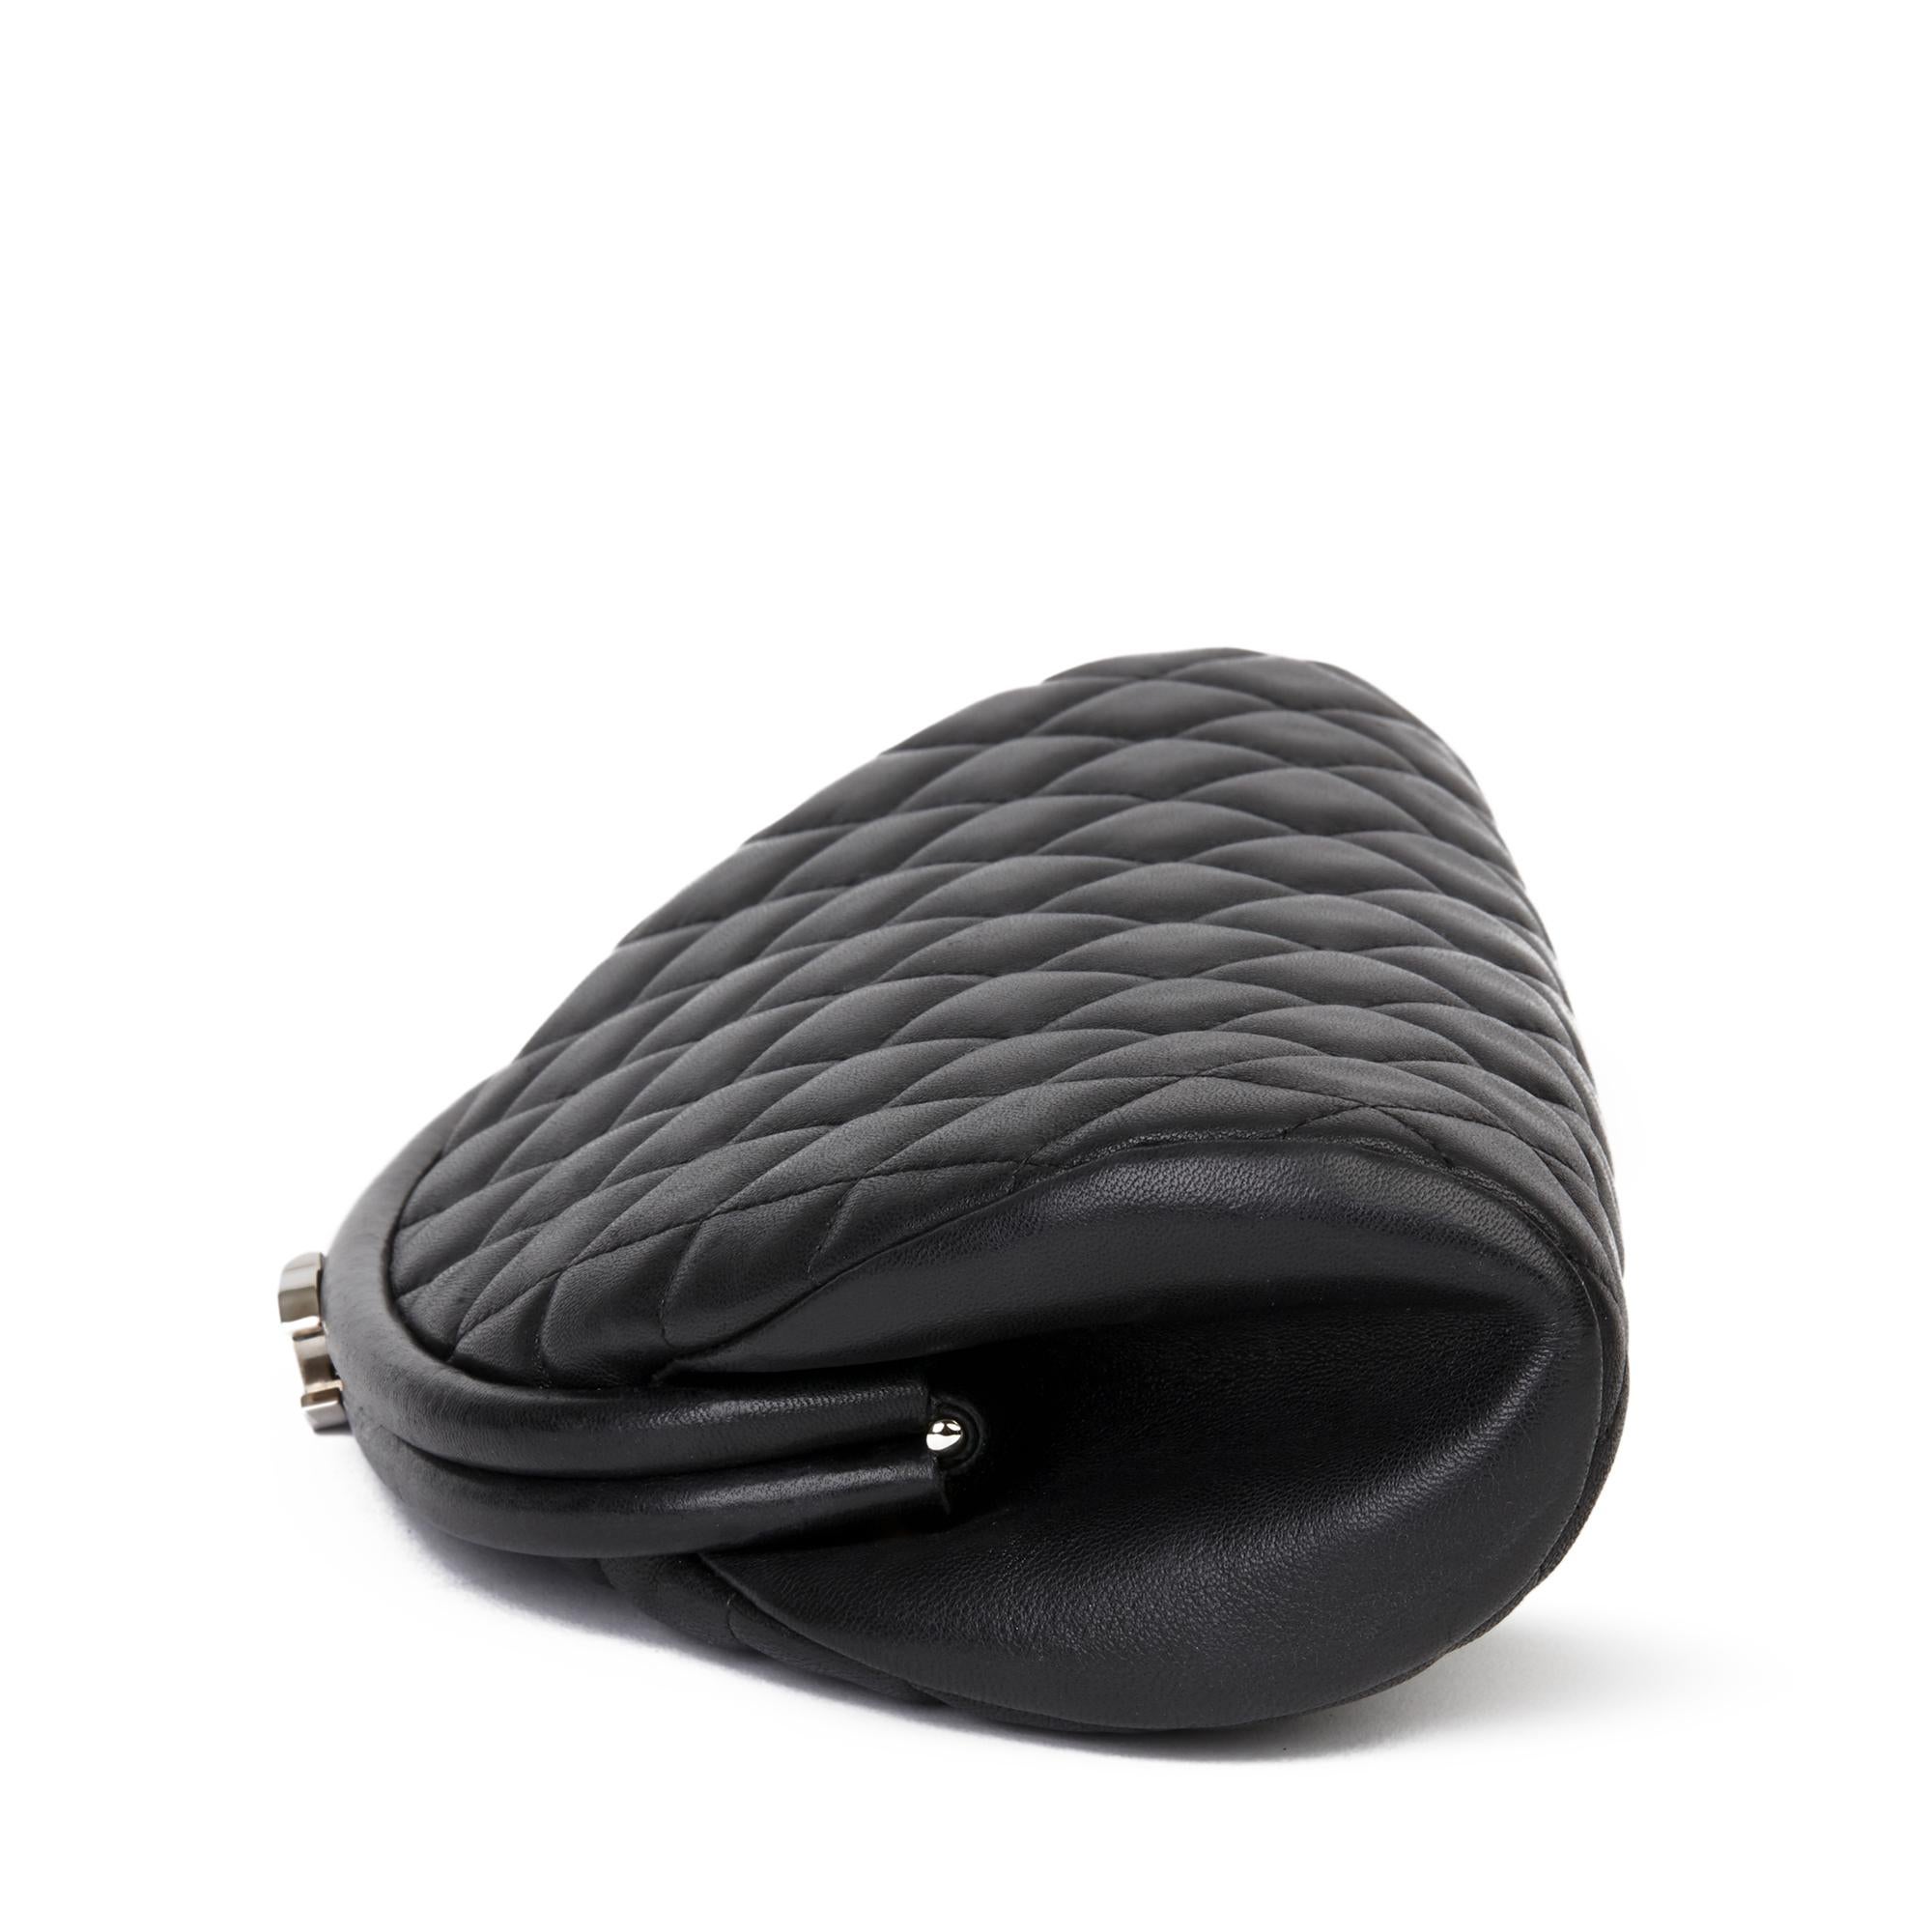 CHANEL
Black Quilted Lambskin Timeless Clutch

Xupes Reference: HB3346
Serial Number: 13787846
Age (Circa): 2011
Accompanied By: Chanel Dust Bag, Box, Authenticity Card, Care Booklet
Authenticity Details: Authenticity Card, Serial Sticker (Made in